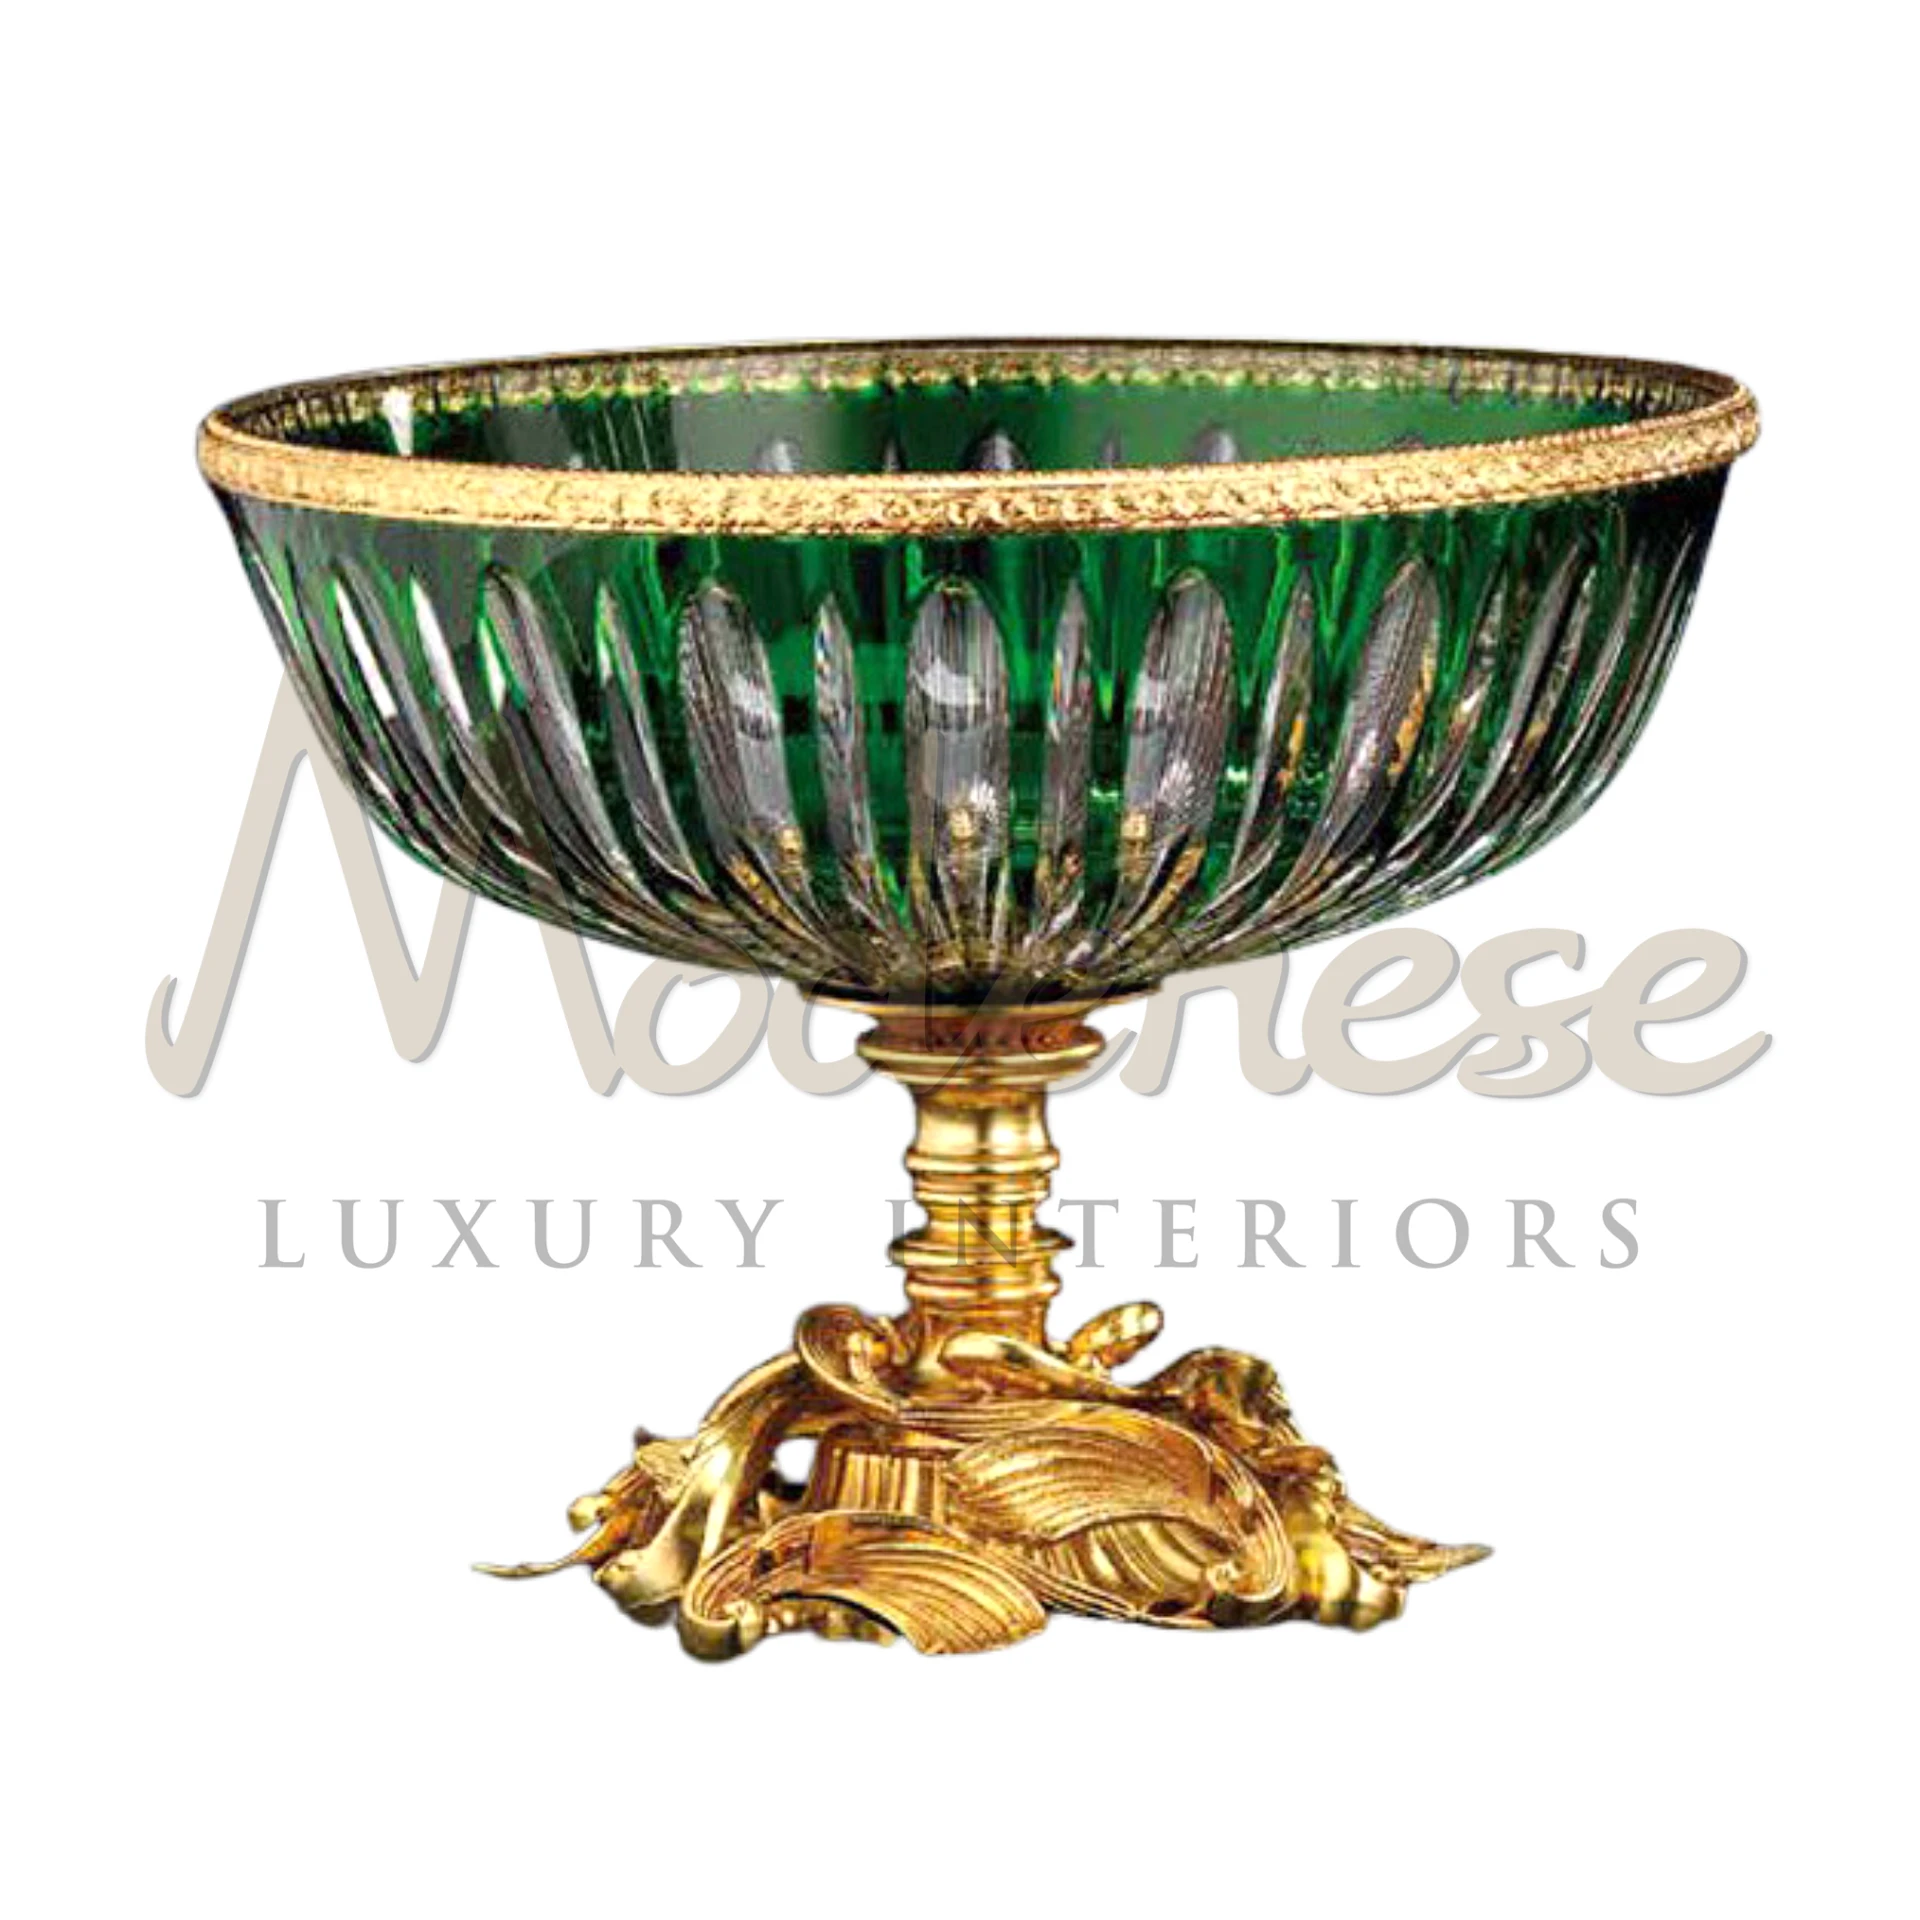 Classical Green Glass Bowl, emphasizing quality and craftsmanship, perfect for adding a touch of luxury and classic style to interior design settings.






